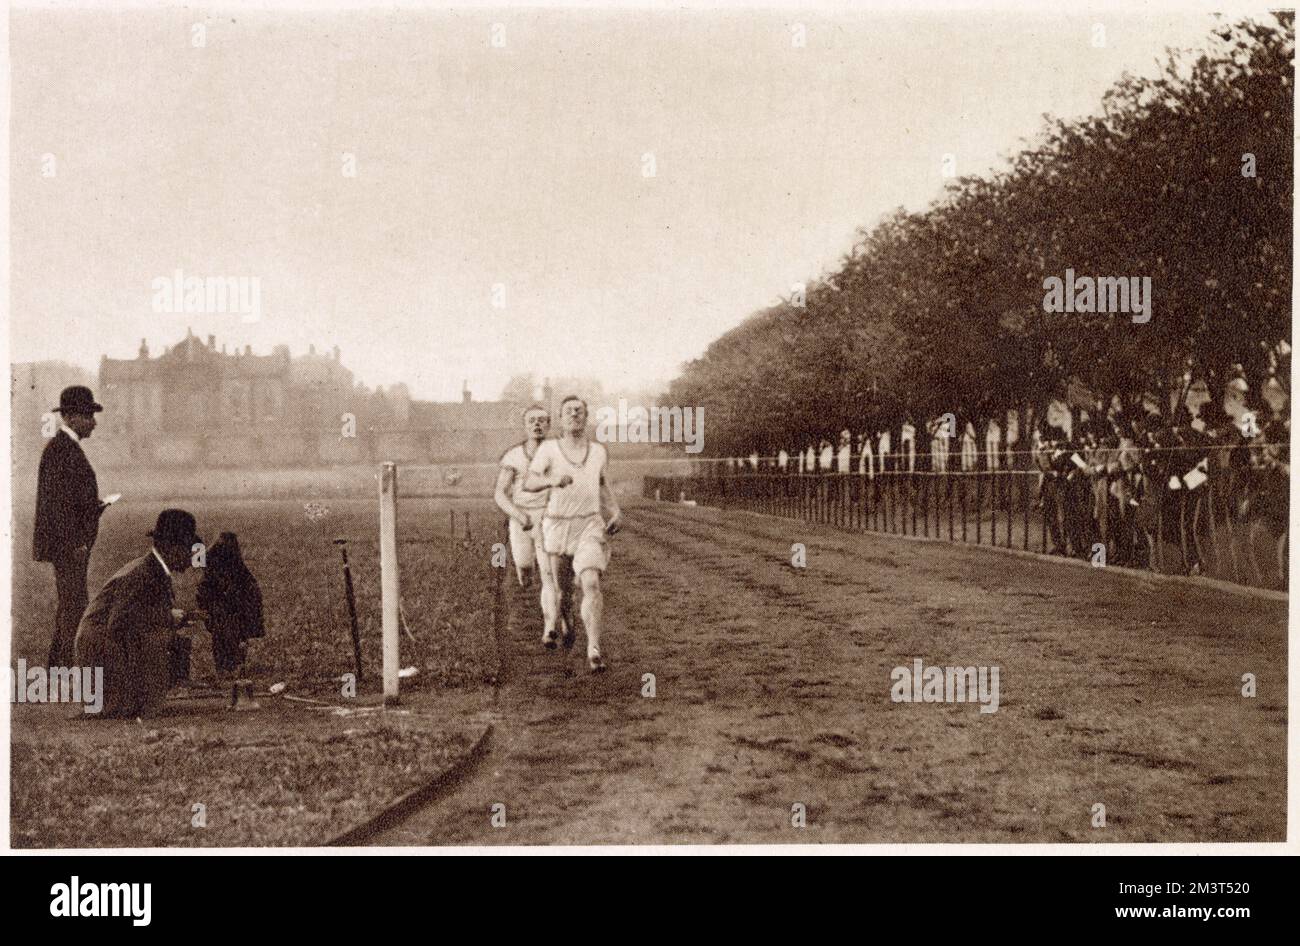 Alec Nelson (1872 - 1944), beating Joe Binks in a three-quarter-mile race in 3min 15sec at Stamford Bridge in 1899. When his running career came to an end, Nelson took up coaching. He was a professional coach at Cambridge University 1908-1913, and also coached British athletes for the 1912 Olympics in Stockholm. Stock Photo